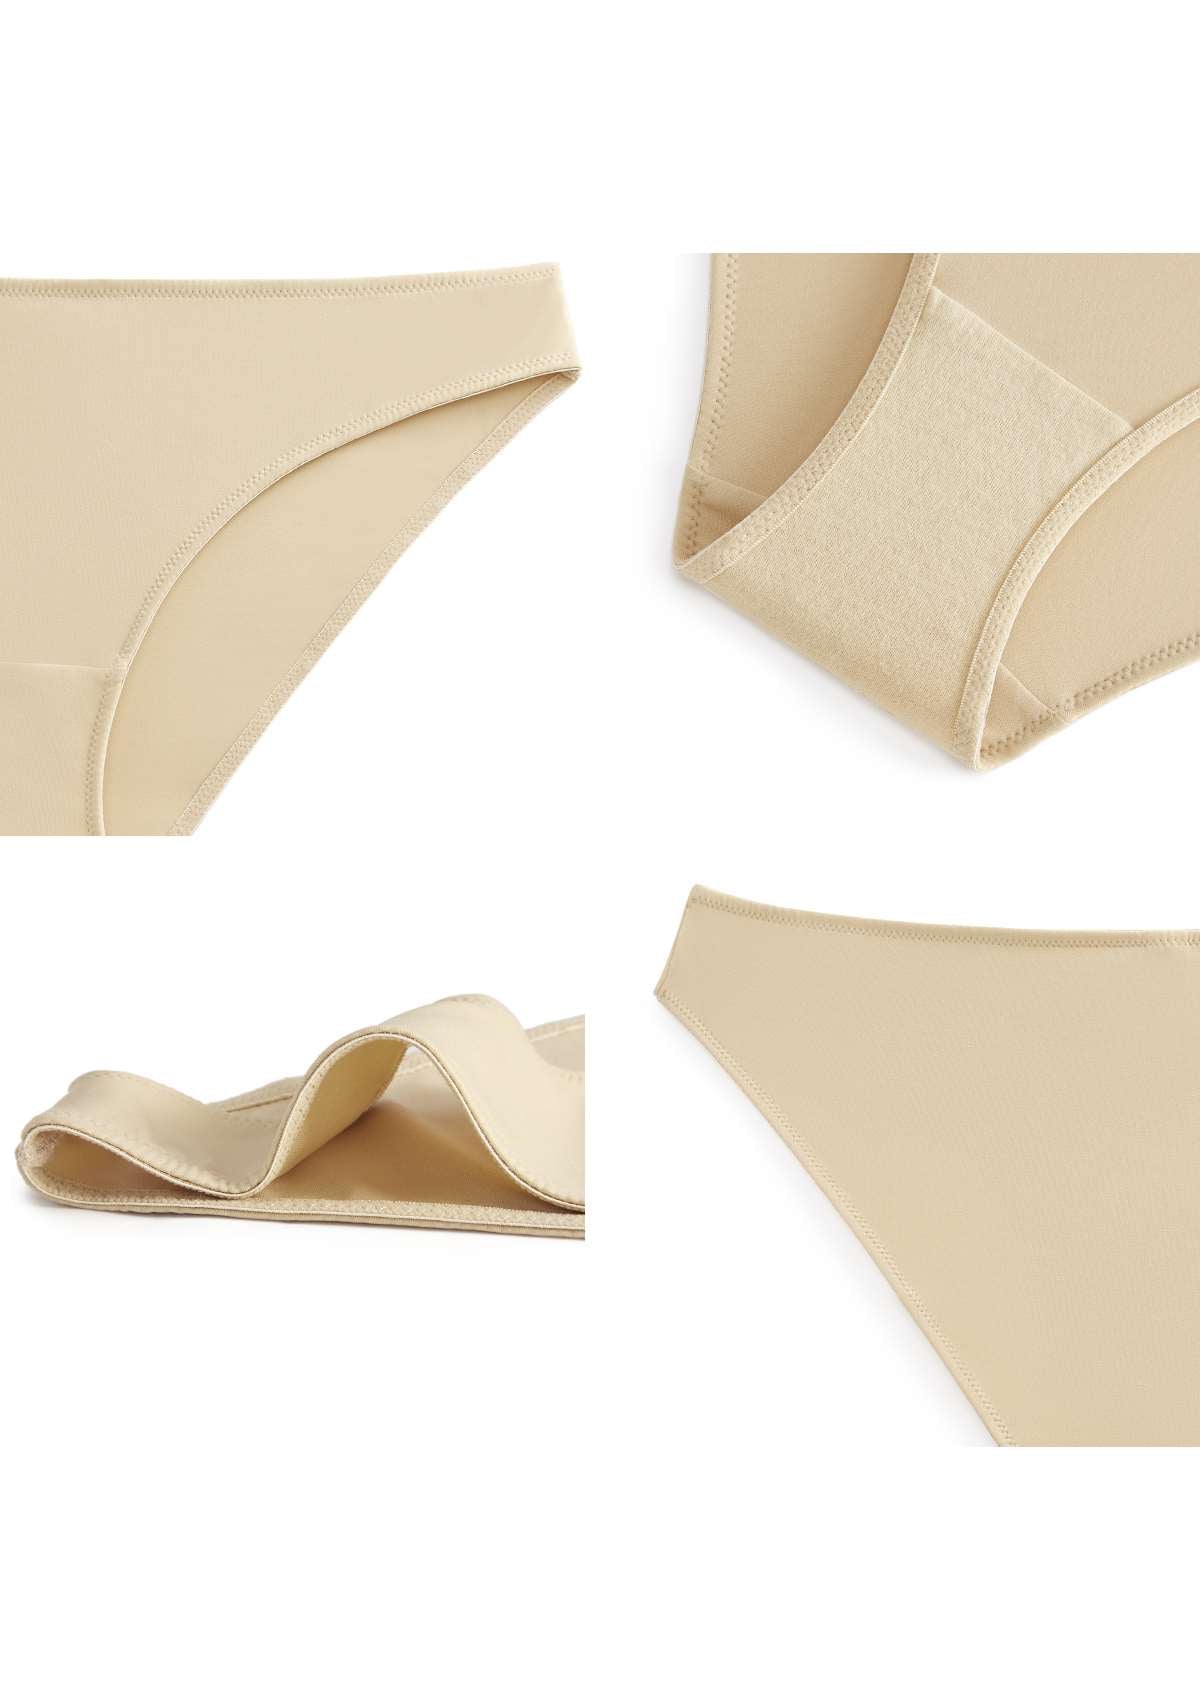 HSIA Patricia Smooth Classic Soft Stretch Panty - Everyday Comfort - XL / Beige